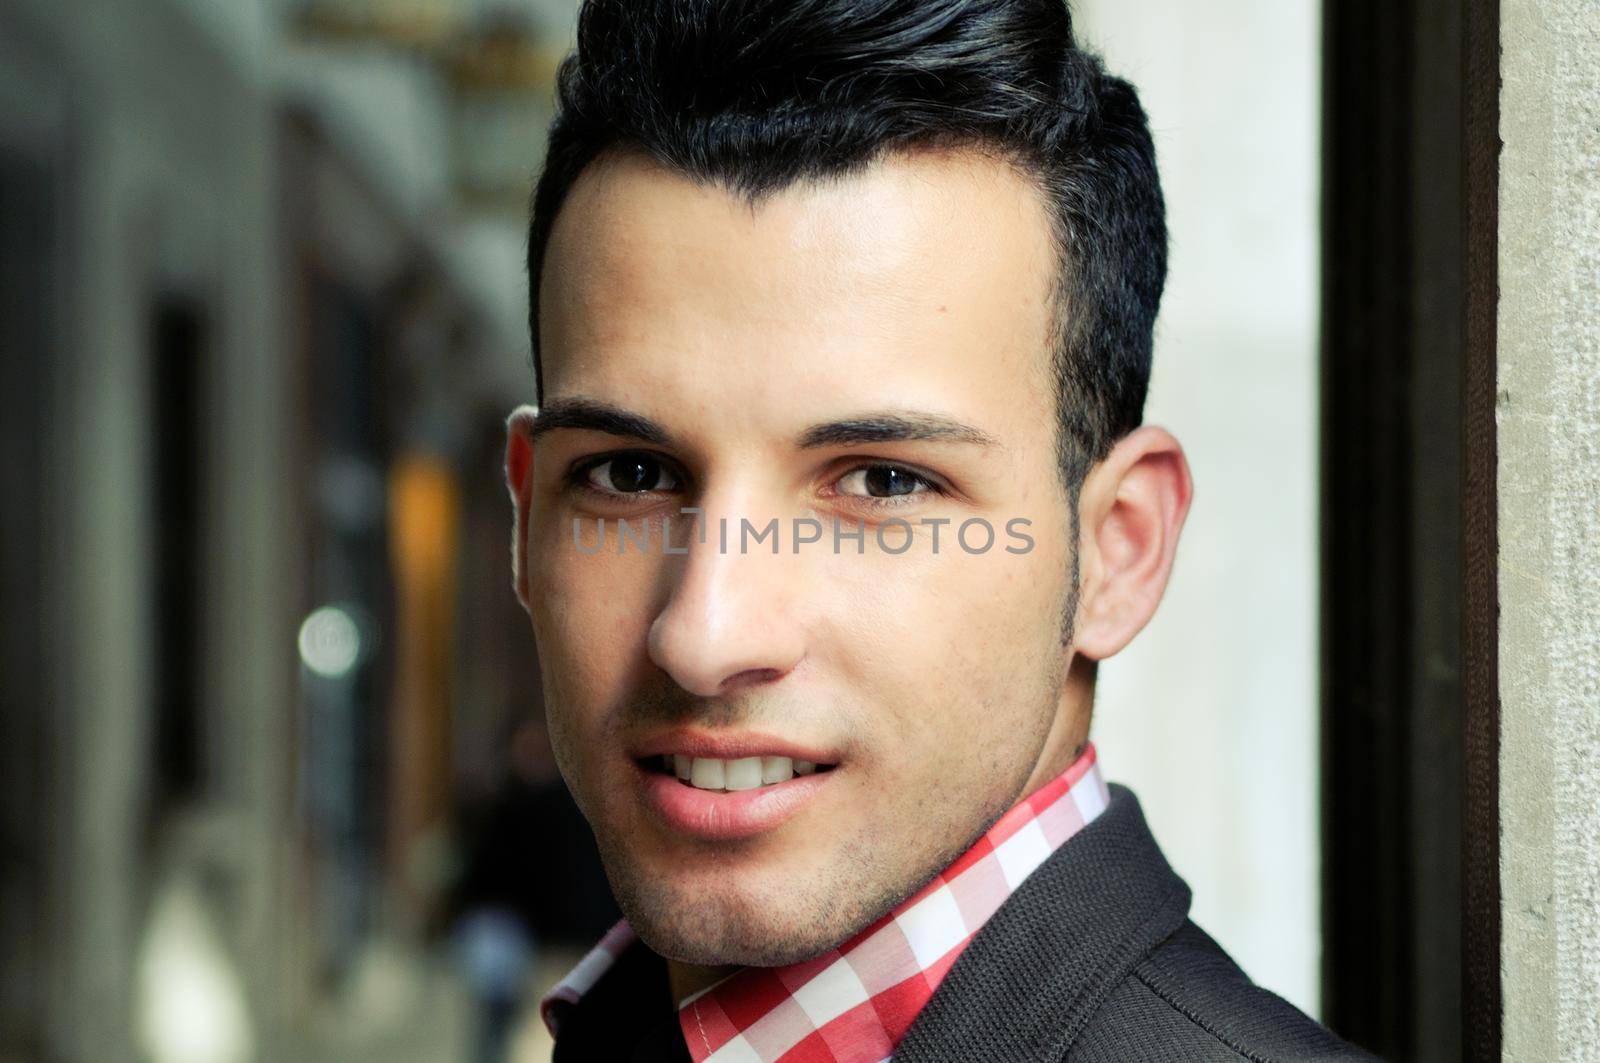 Portrait of a young handsome man, model of fashion, wearing jacket and shirt in urban background